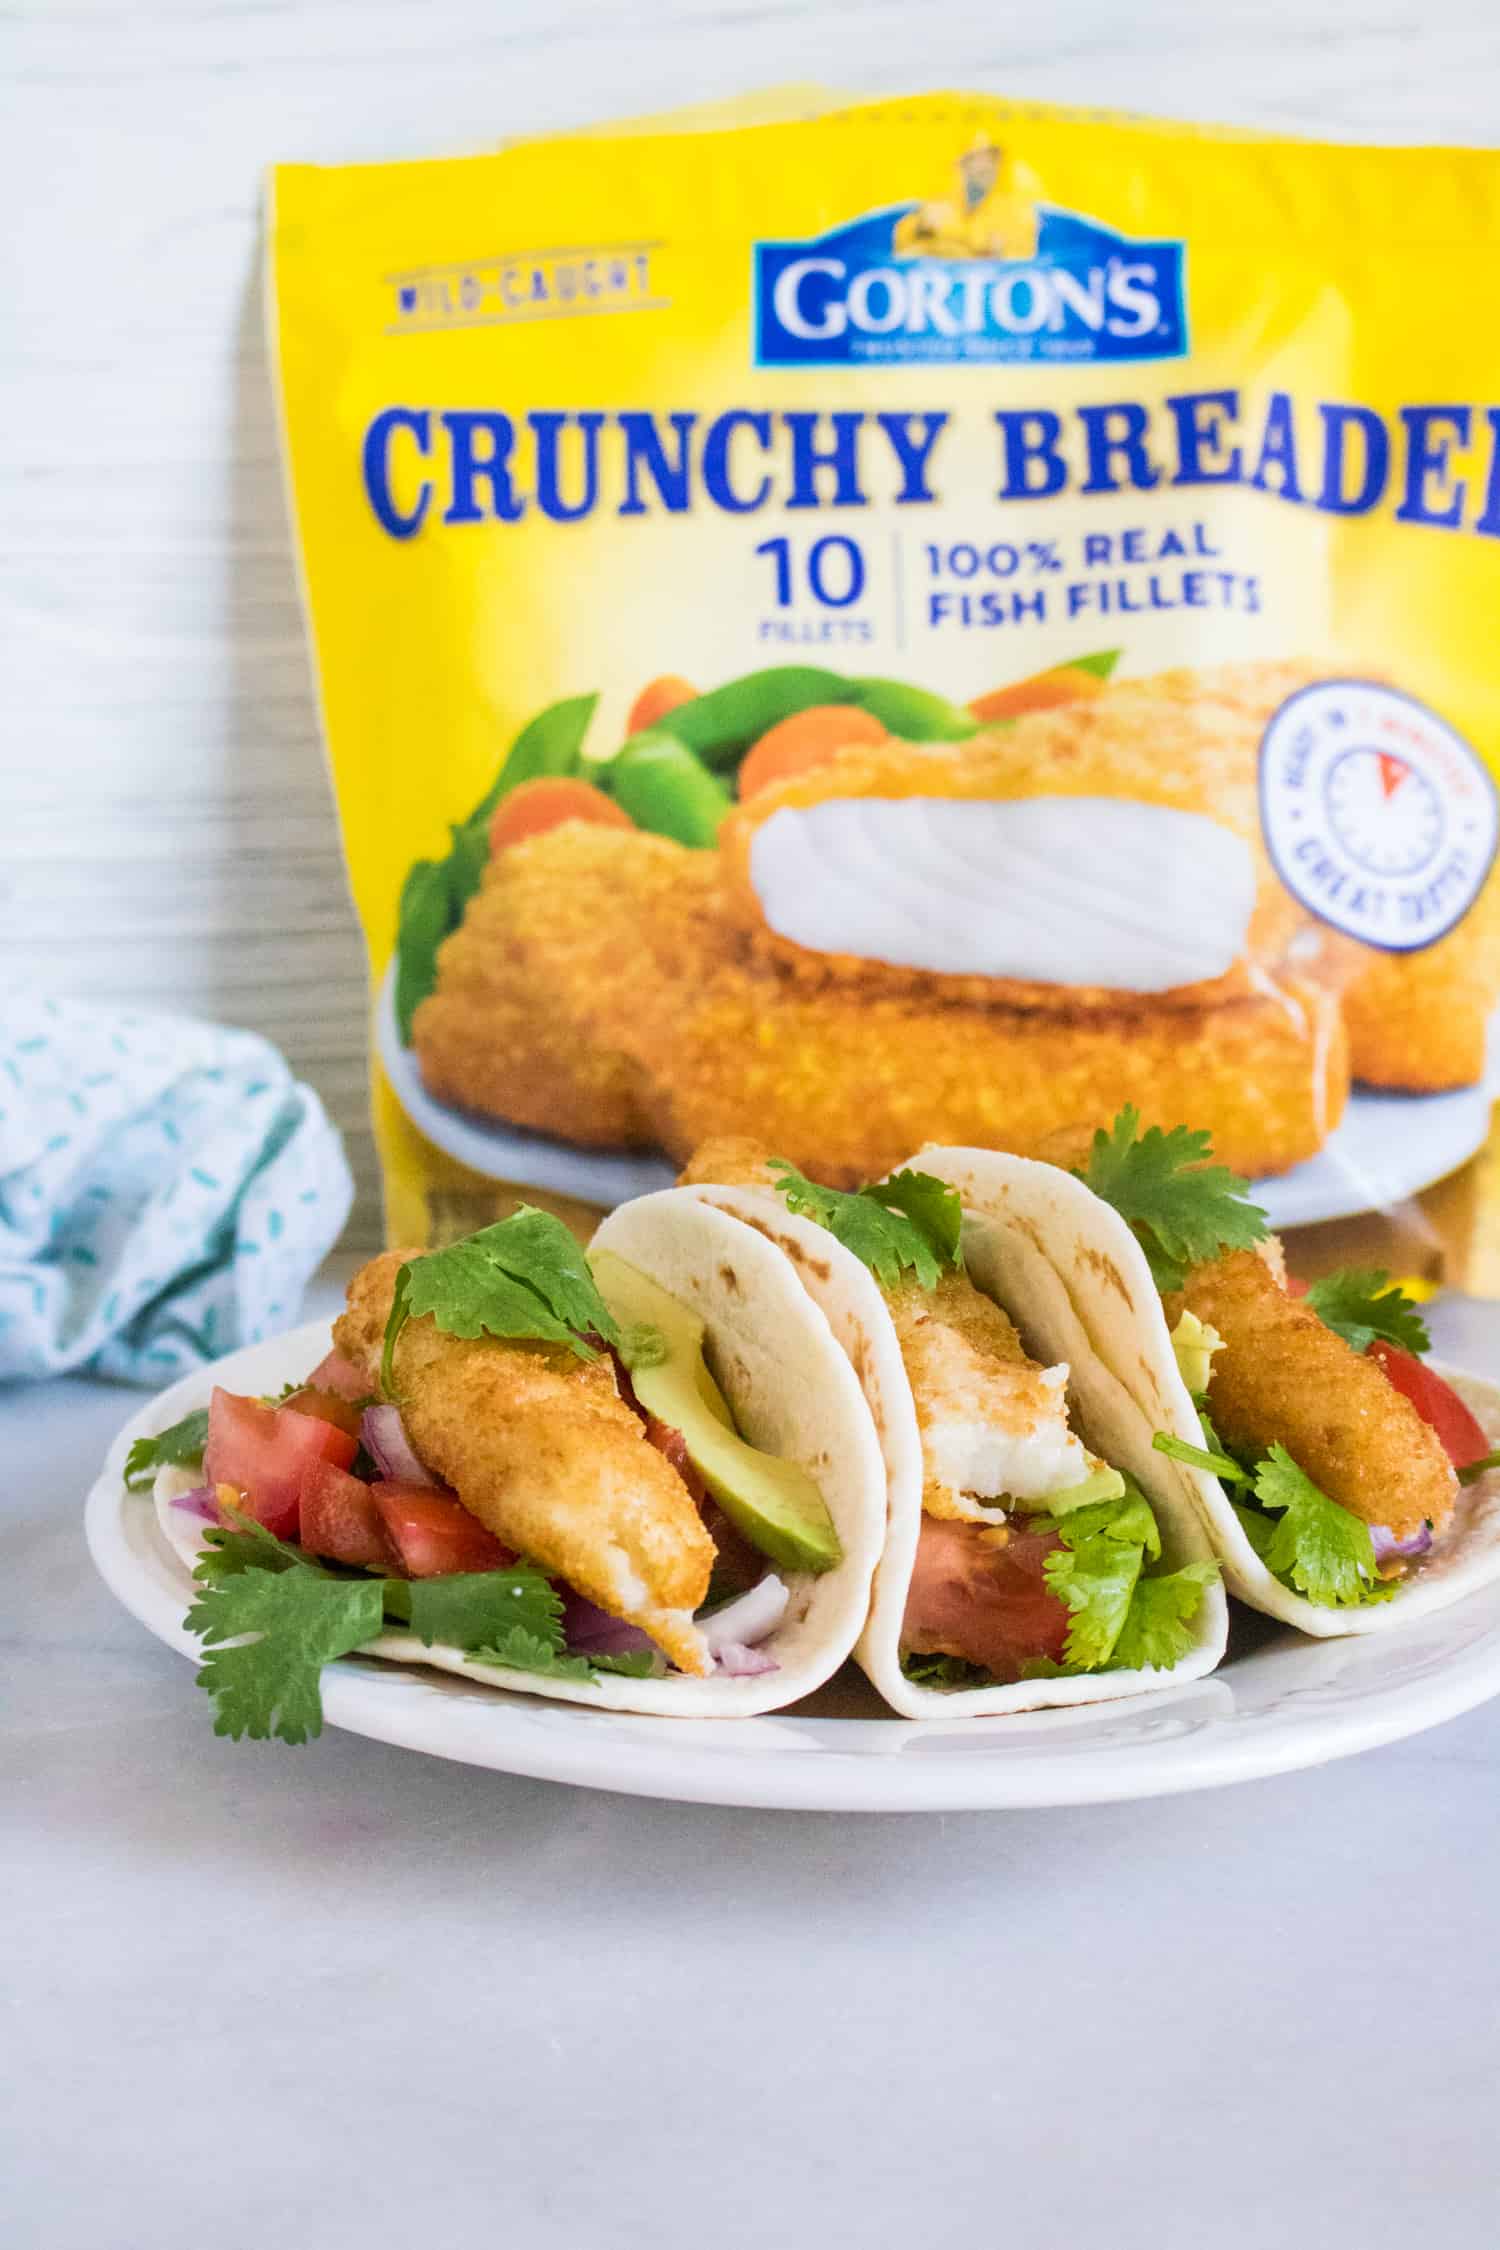 the completed fish taco recipe, featuring three crunchy fish tacos served on a white plate sitting in front of a bag of Gorton's Crunchy Breaded Fish Fillets